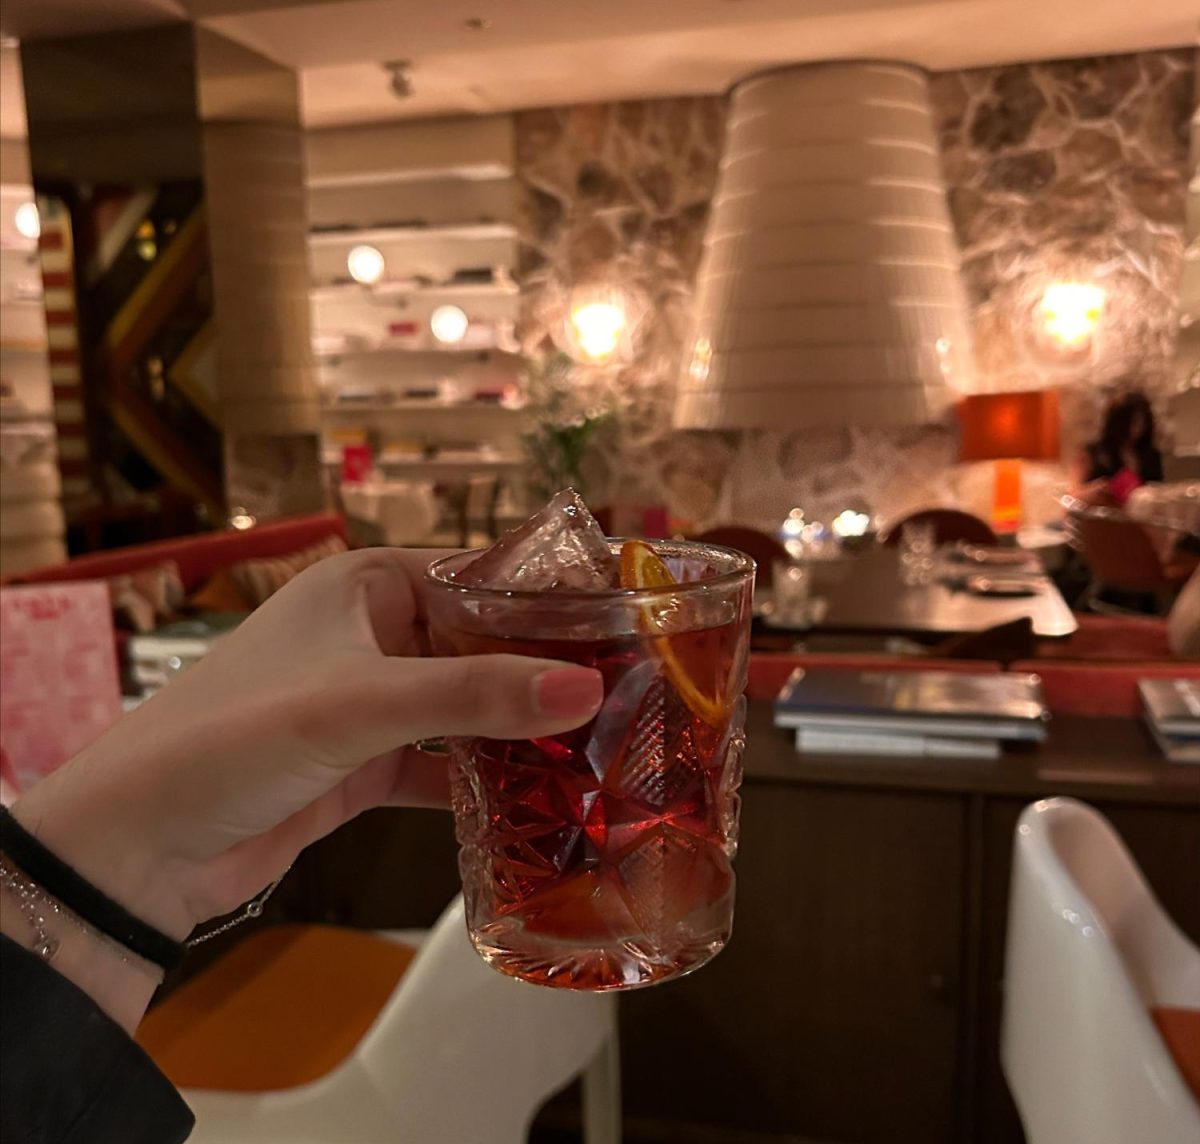 The Negroni at Le Club Sushita in Madrid. Instead of traveling across Europe, the writer enjoyed a staycation with her sister.